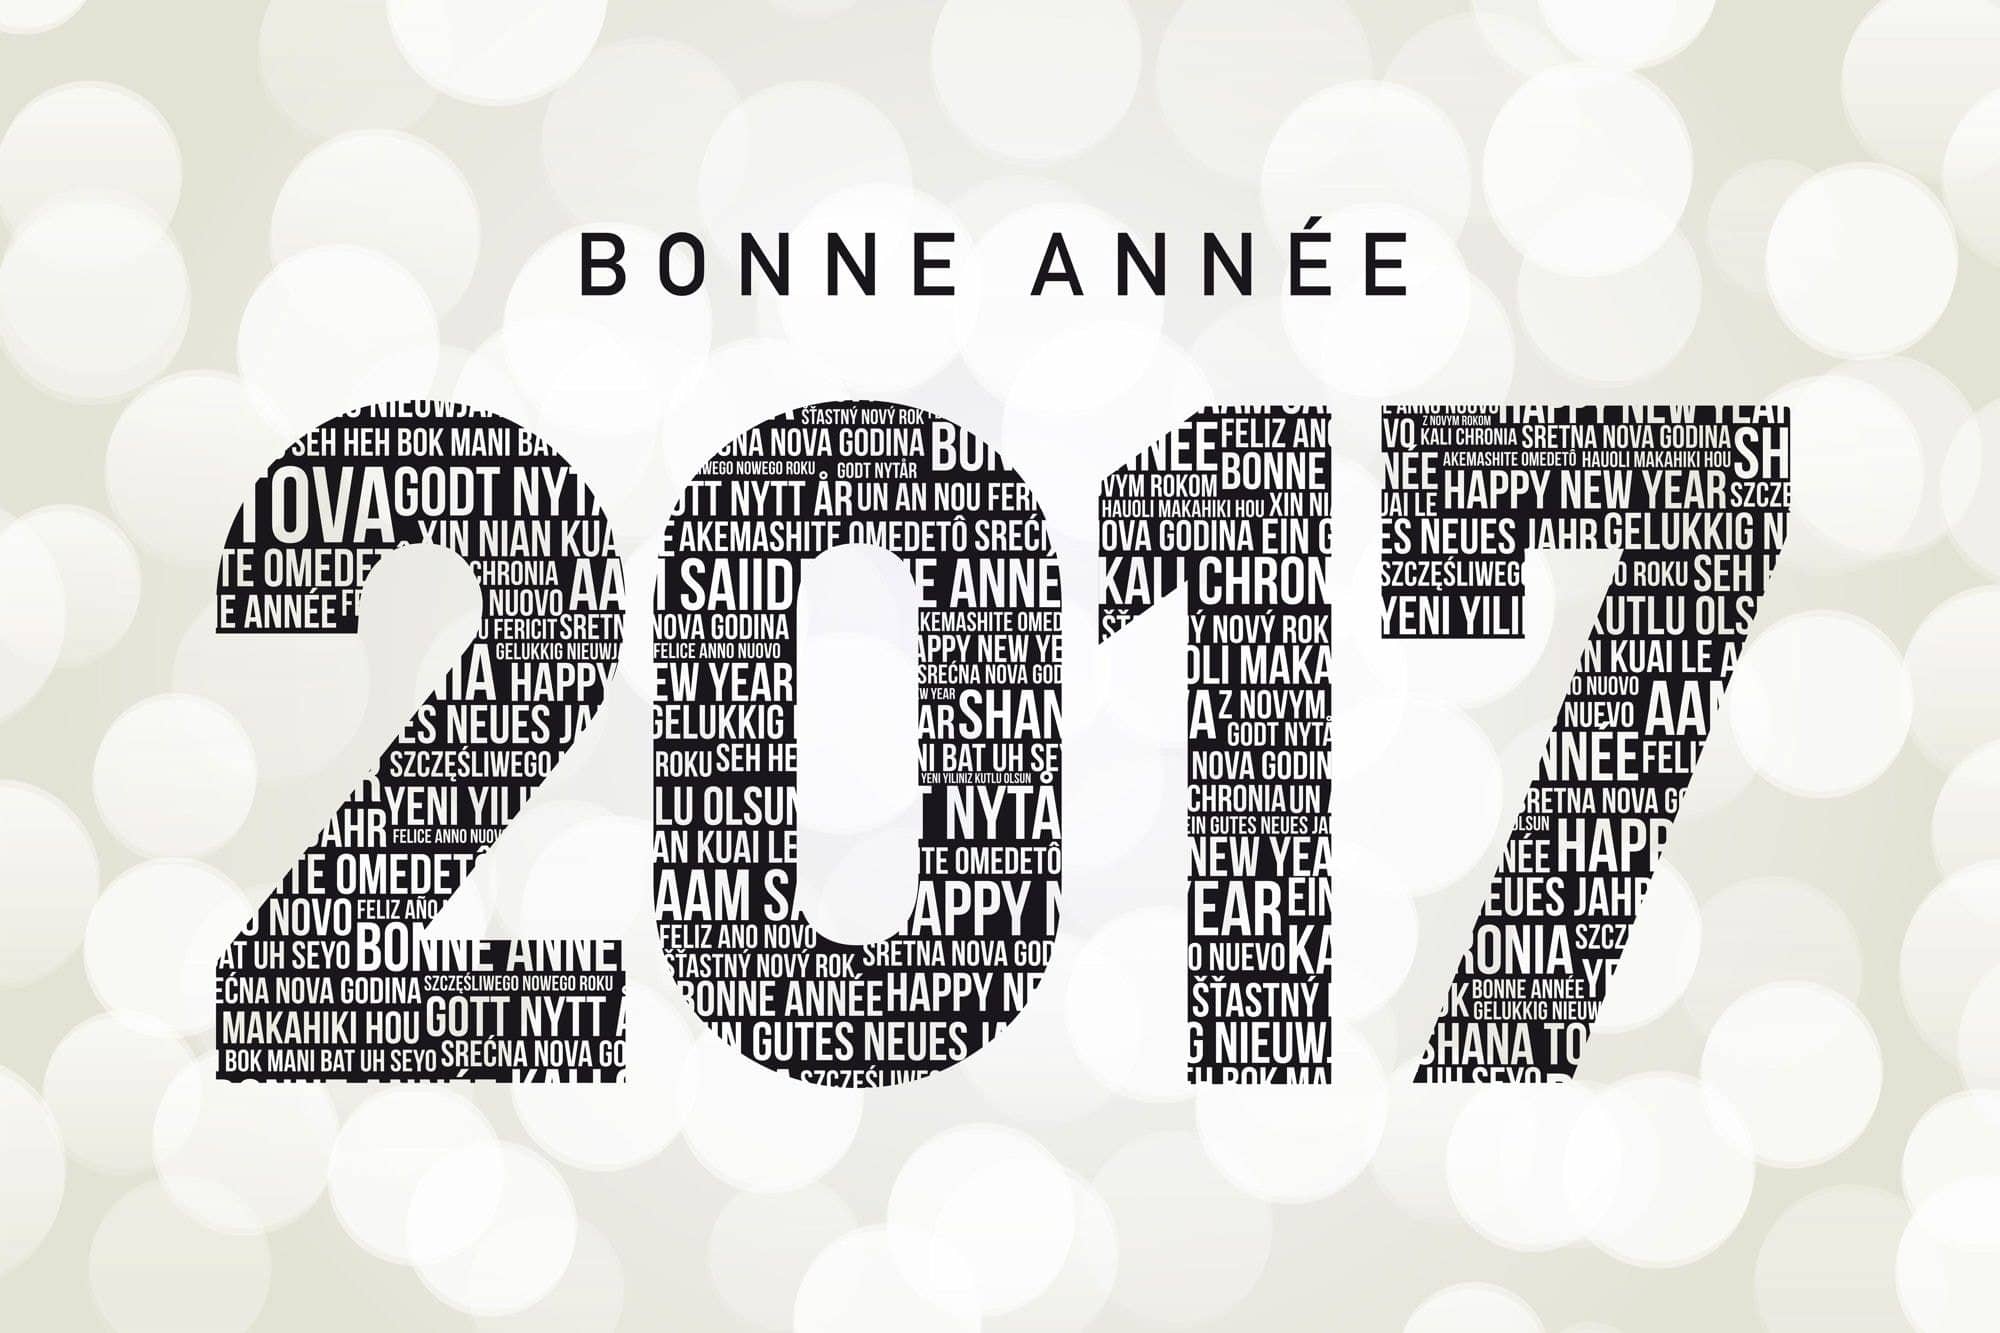 You are currently viewing Bonne année 2017